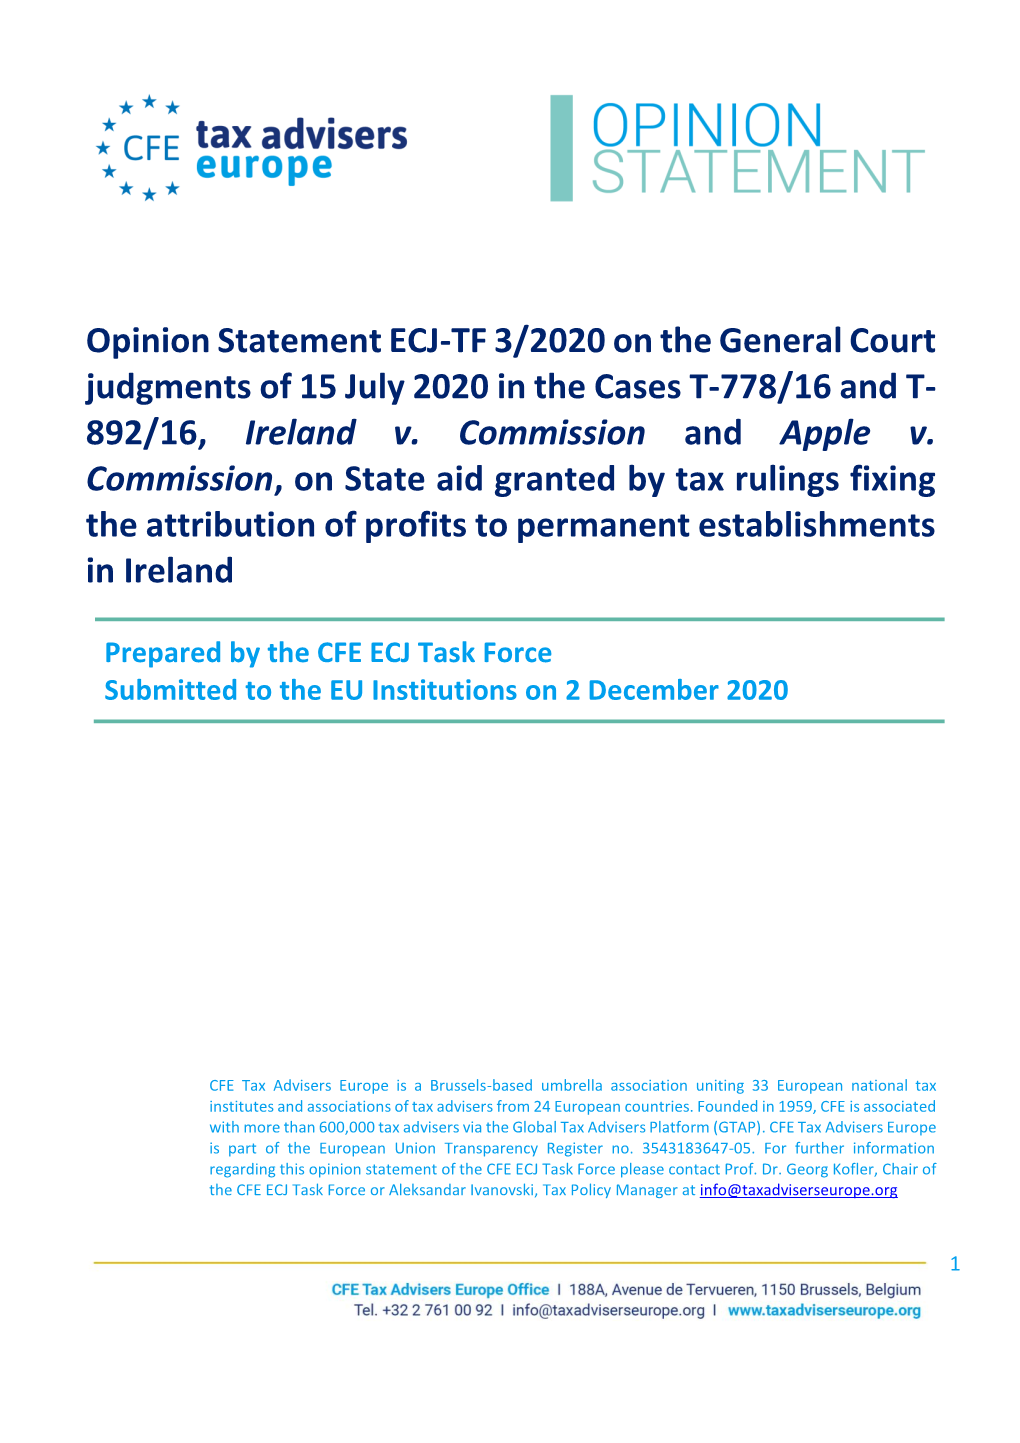 Opinion Statement ECJ-TF 3/2020 on the General Court Judgments of 15 July 2020 in the Cases T-778/16 and T- 892/16, Ireland V